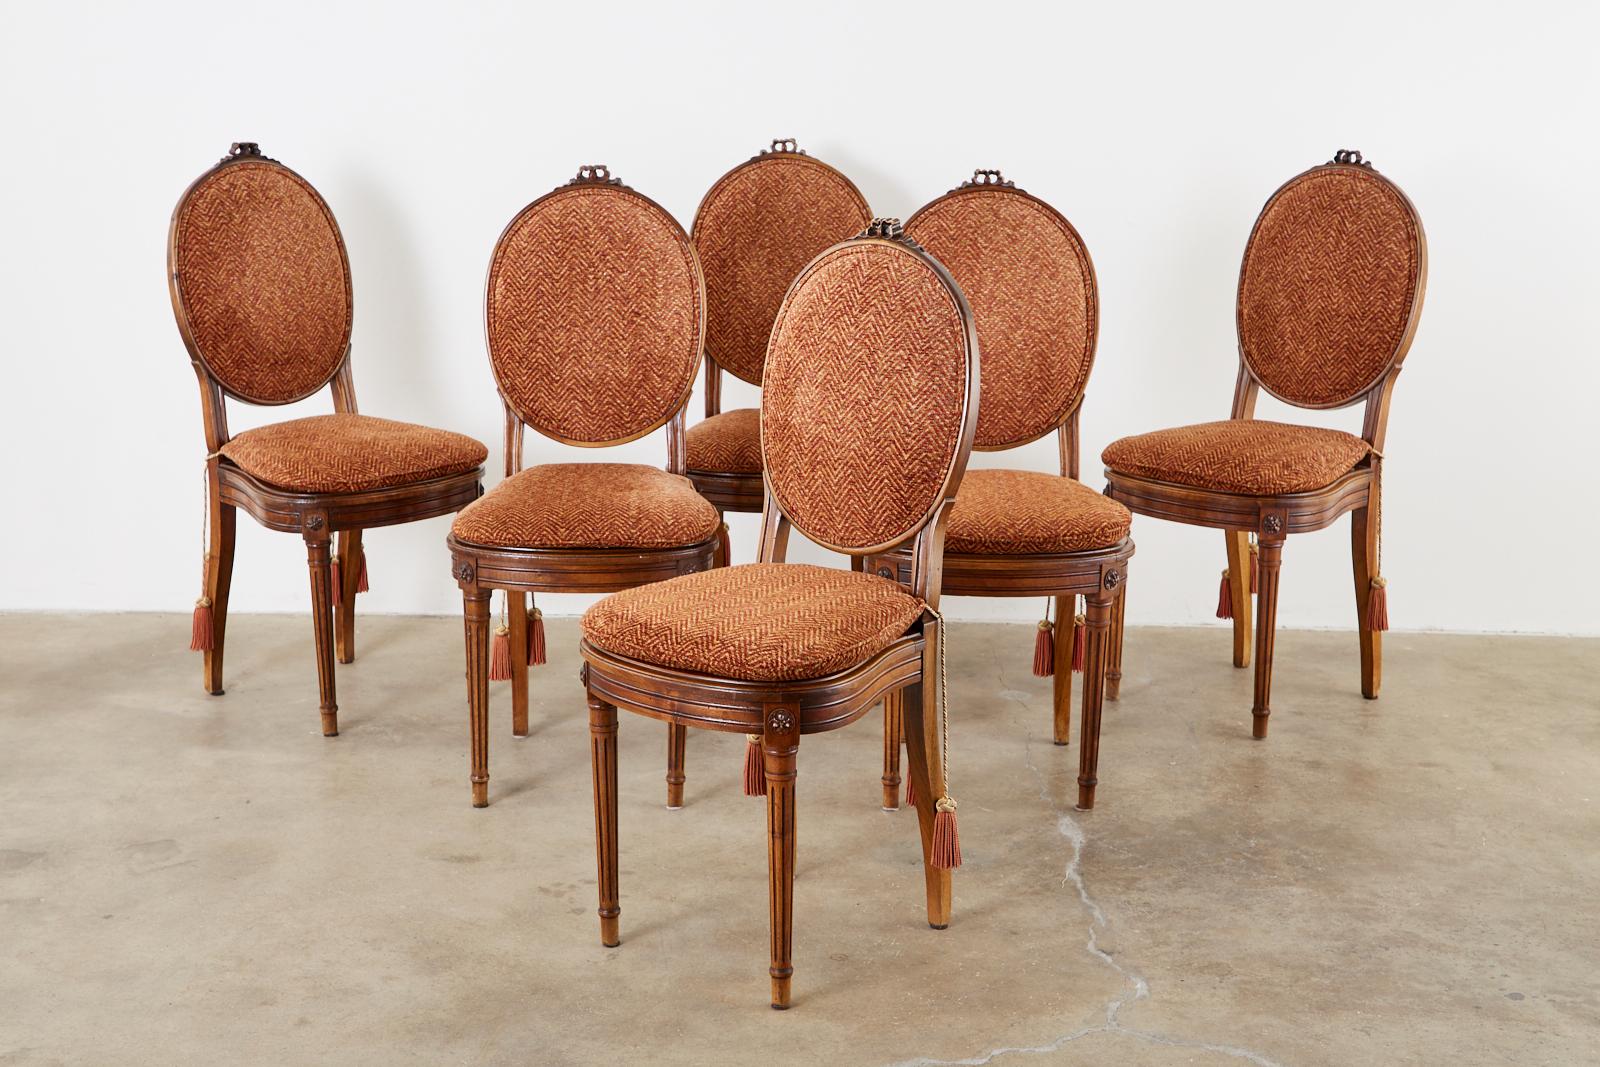 Extraordinary set of six 19th century French mahogany dining chairs featuring hand-caned seats. Made in the grand Louis XVI taste with neoclassical fluted column front legs. The rich mahogany frames have a round upholstered back with a chevron